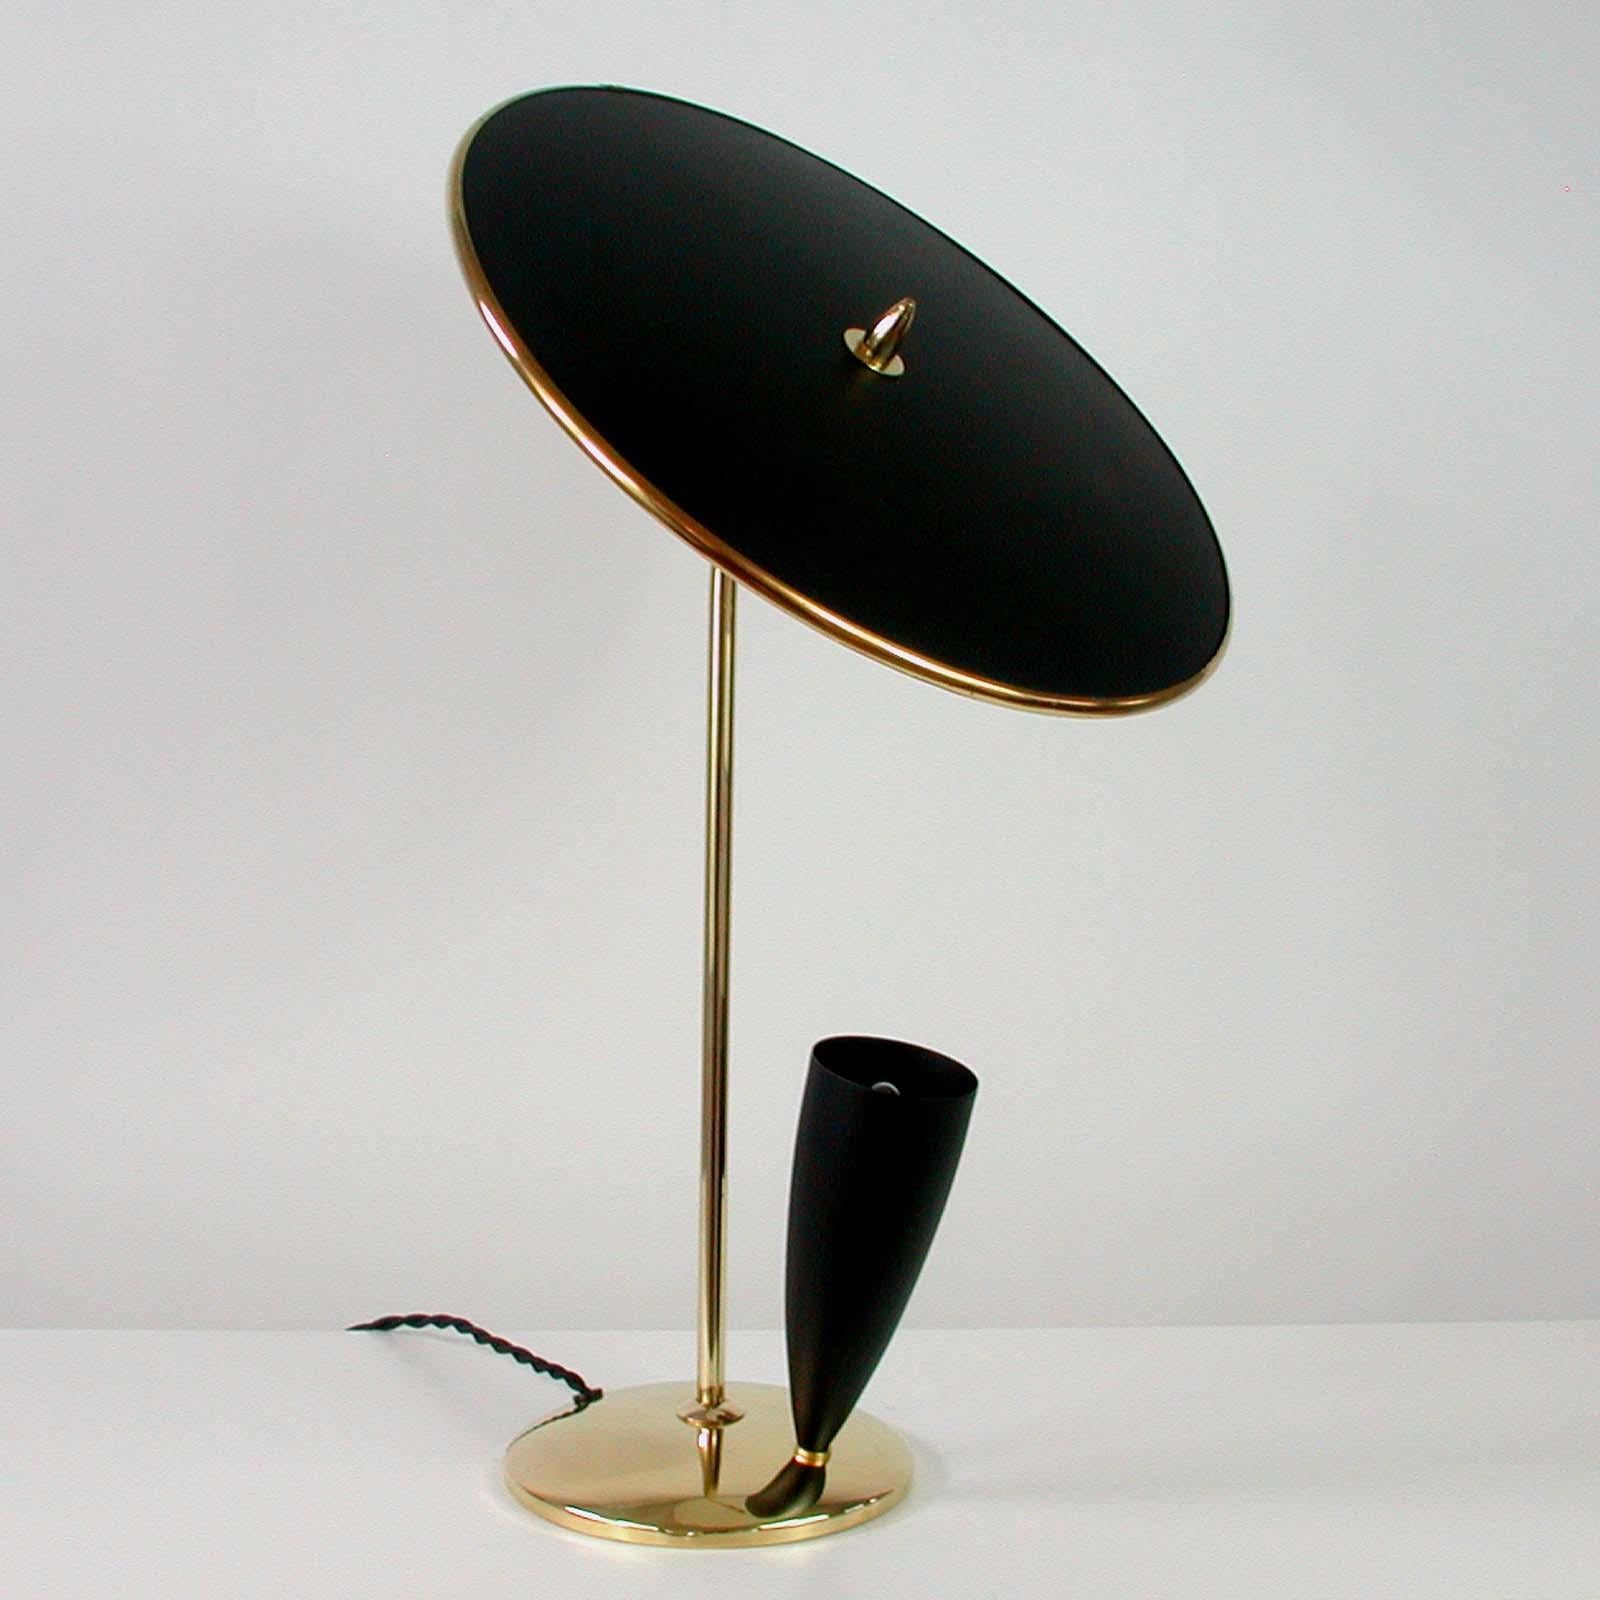 This elegant Maison Arlus style table light was designed and manufactured in France in the 1950s.

It has got a black adjustable reflecting lampshade, a brass lamp arm and black bulb holder.
The lamp is in excellent vintage condition and has been